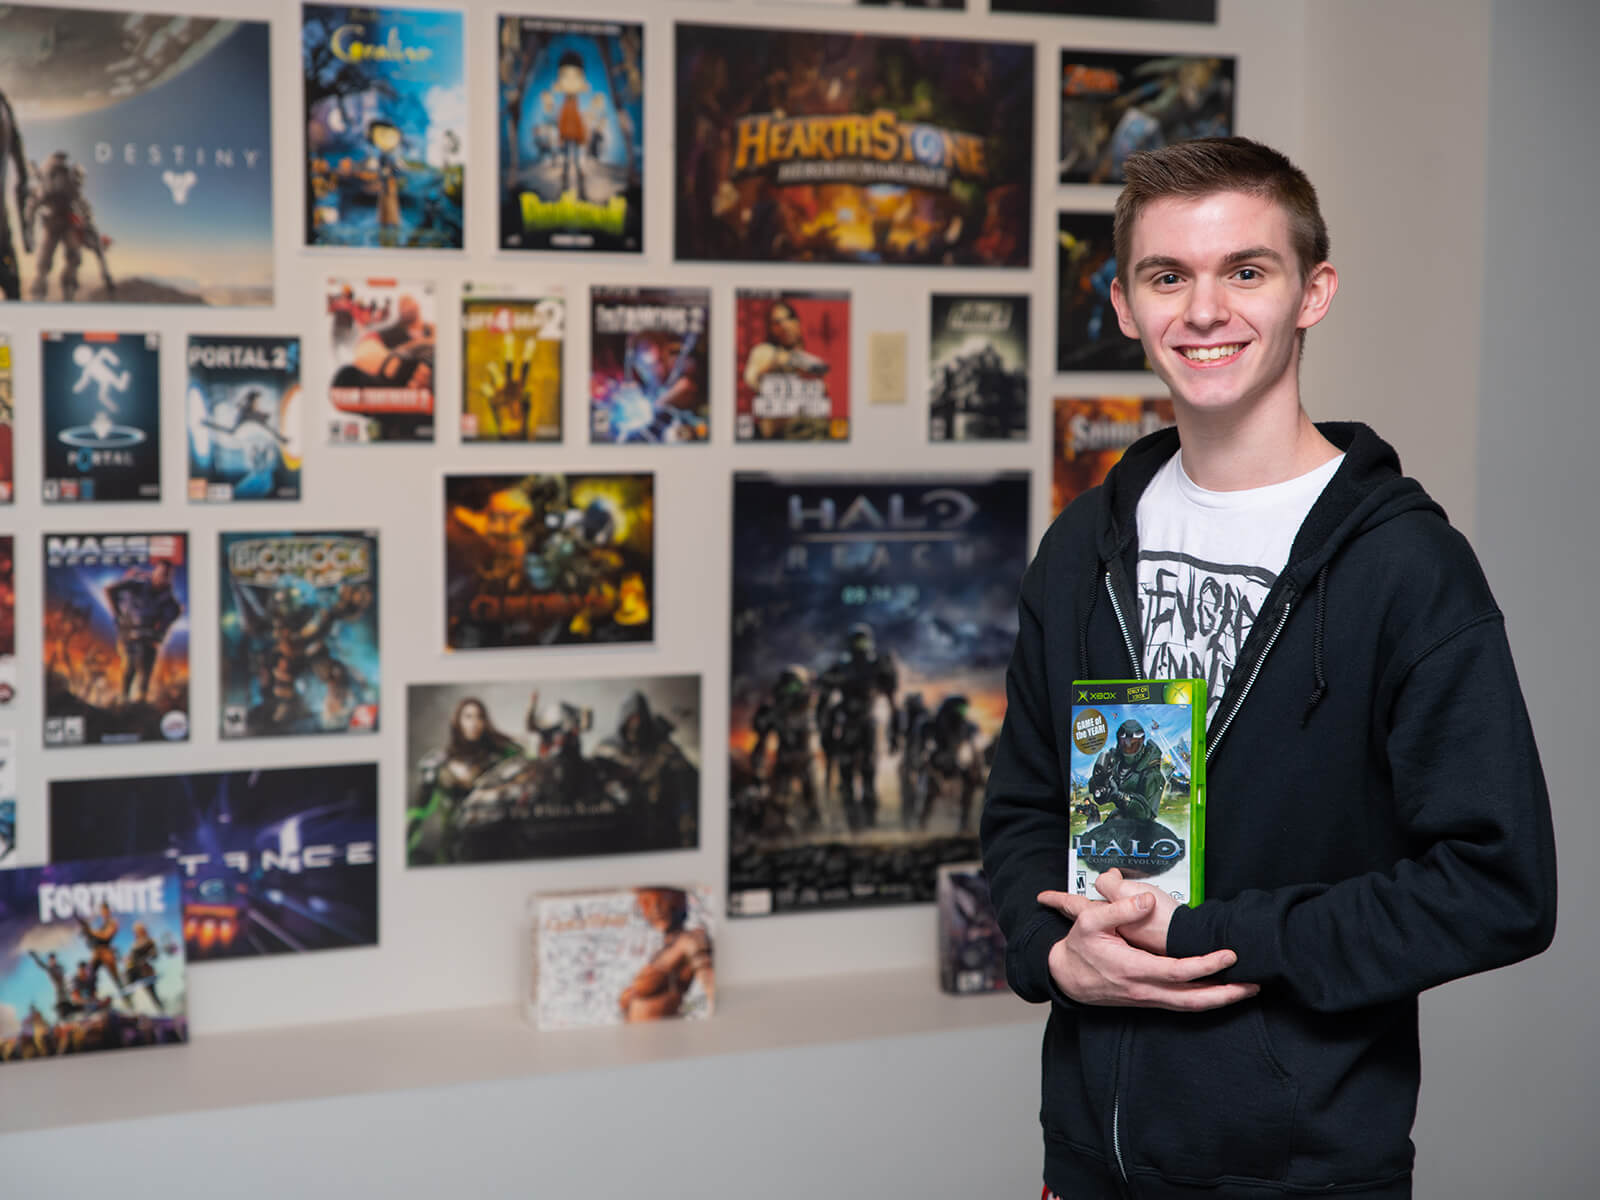 Brandon Stam poses on DigiPen’s campus with a copy of the original Halo game.